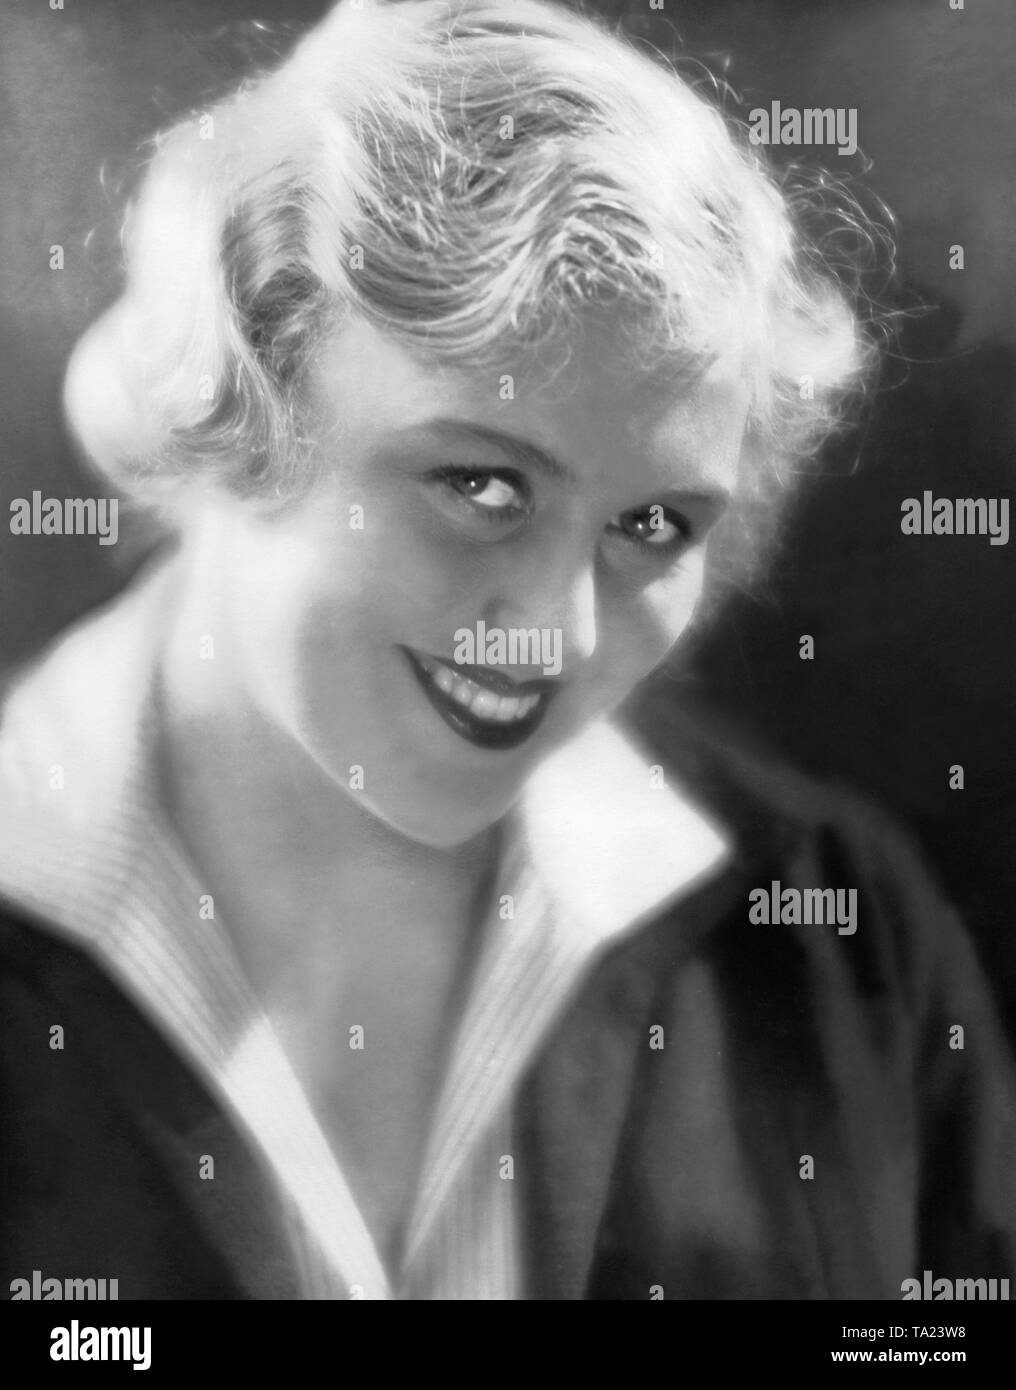 Portrait of the German actress Camilla Spira. She wears the contemporary trendy hairstyle, the 'bob cut'. Stock Photo